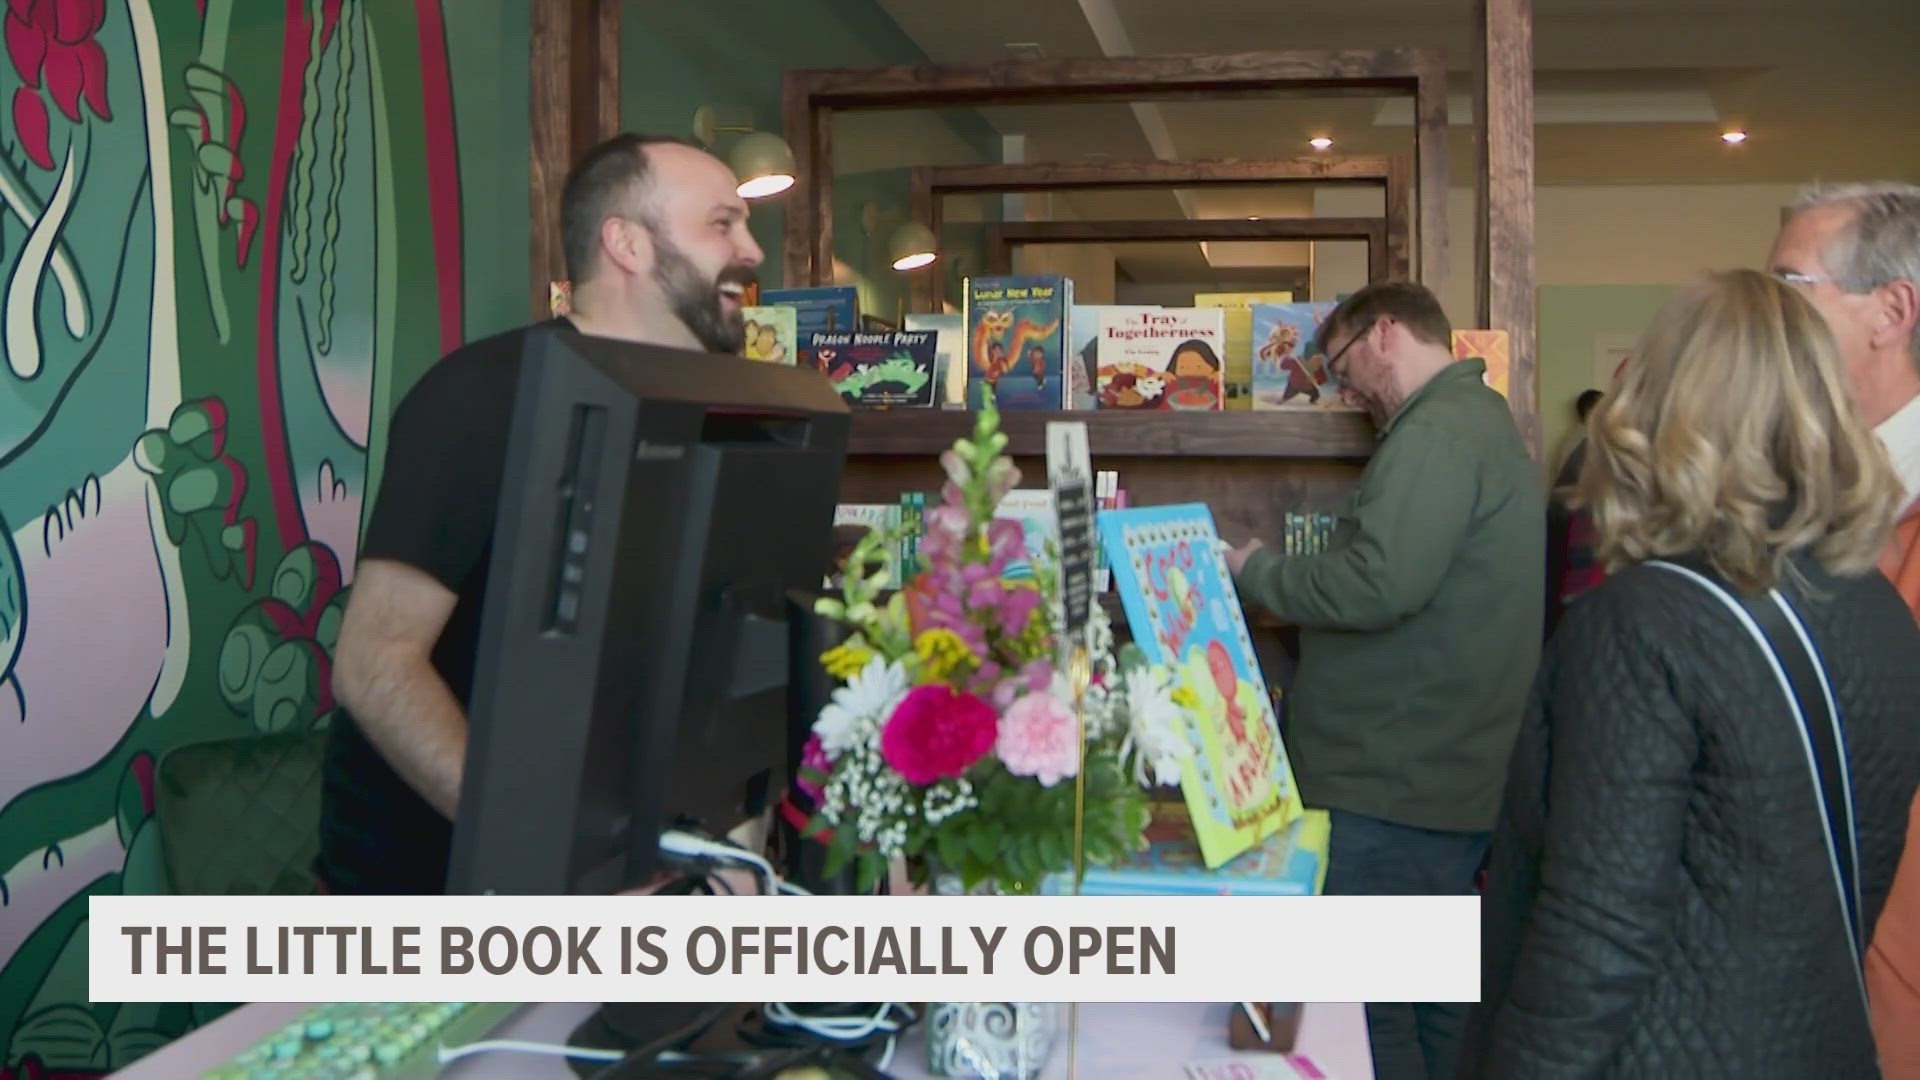 The Little Book hosted its grand opening celebration on Friday.